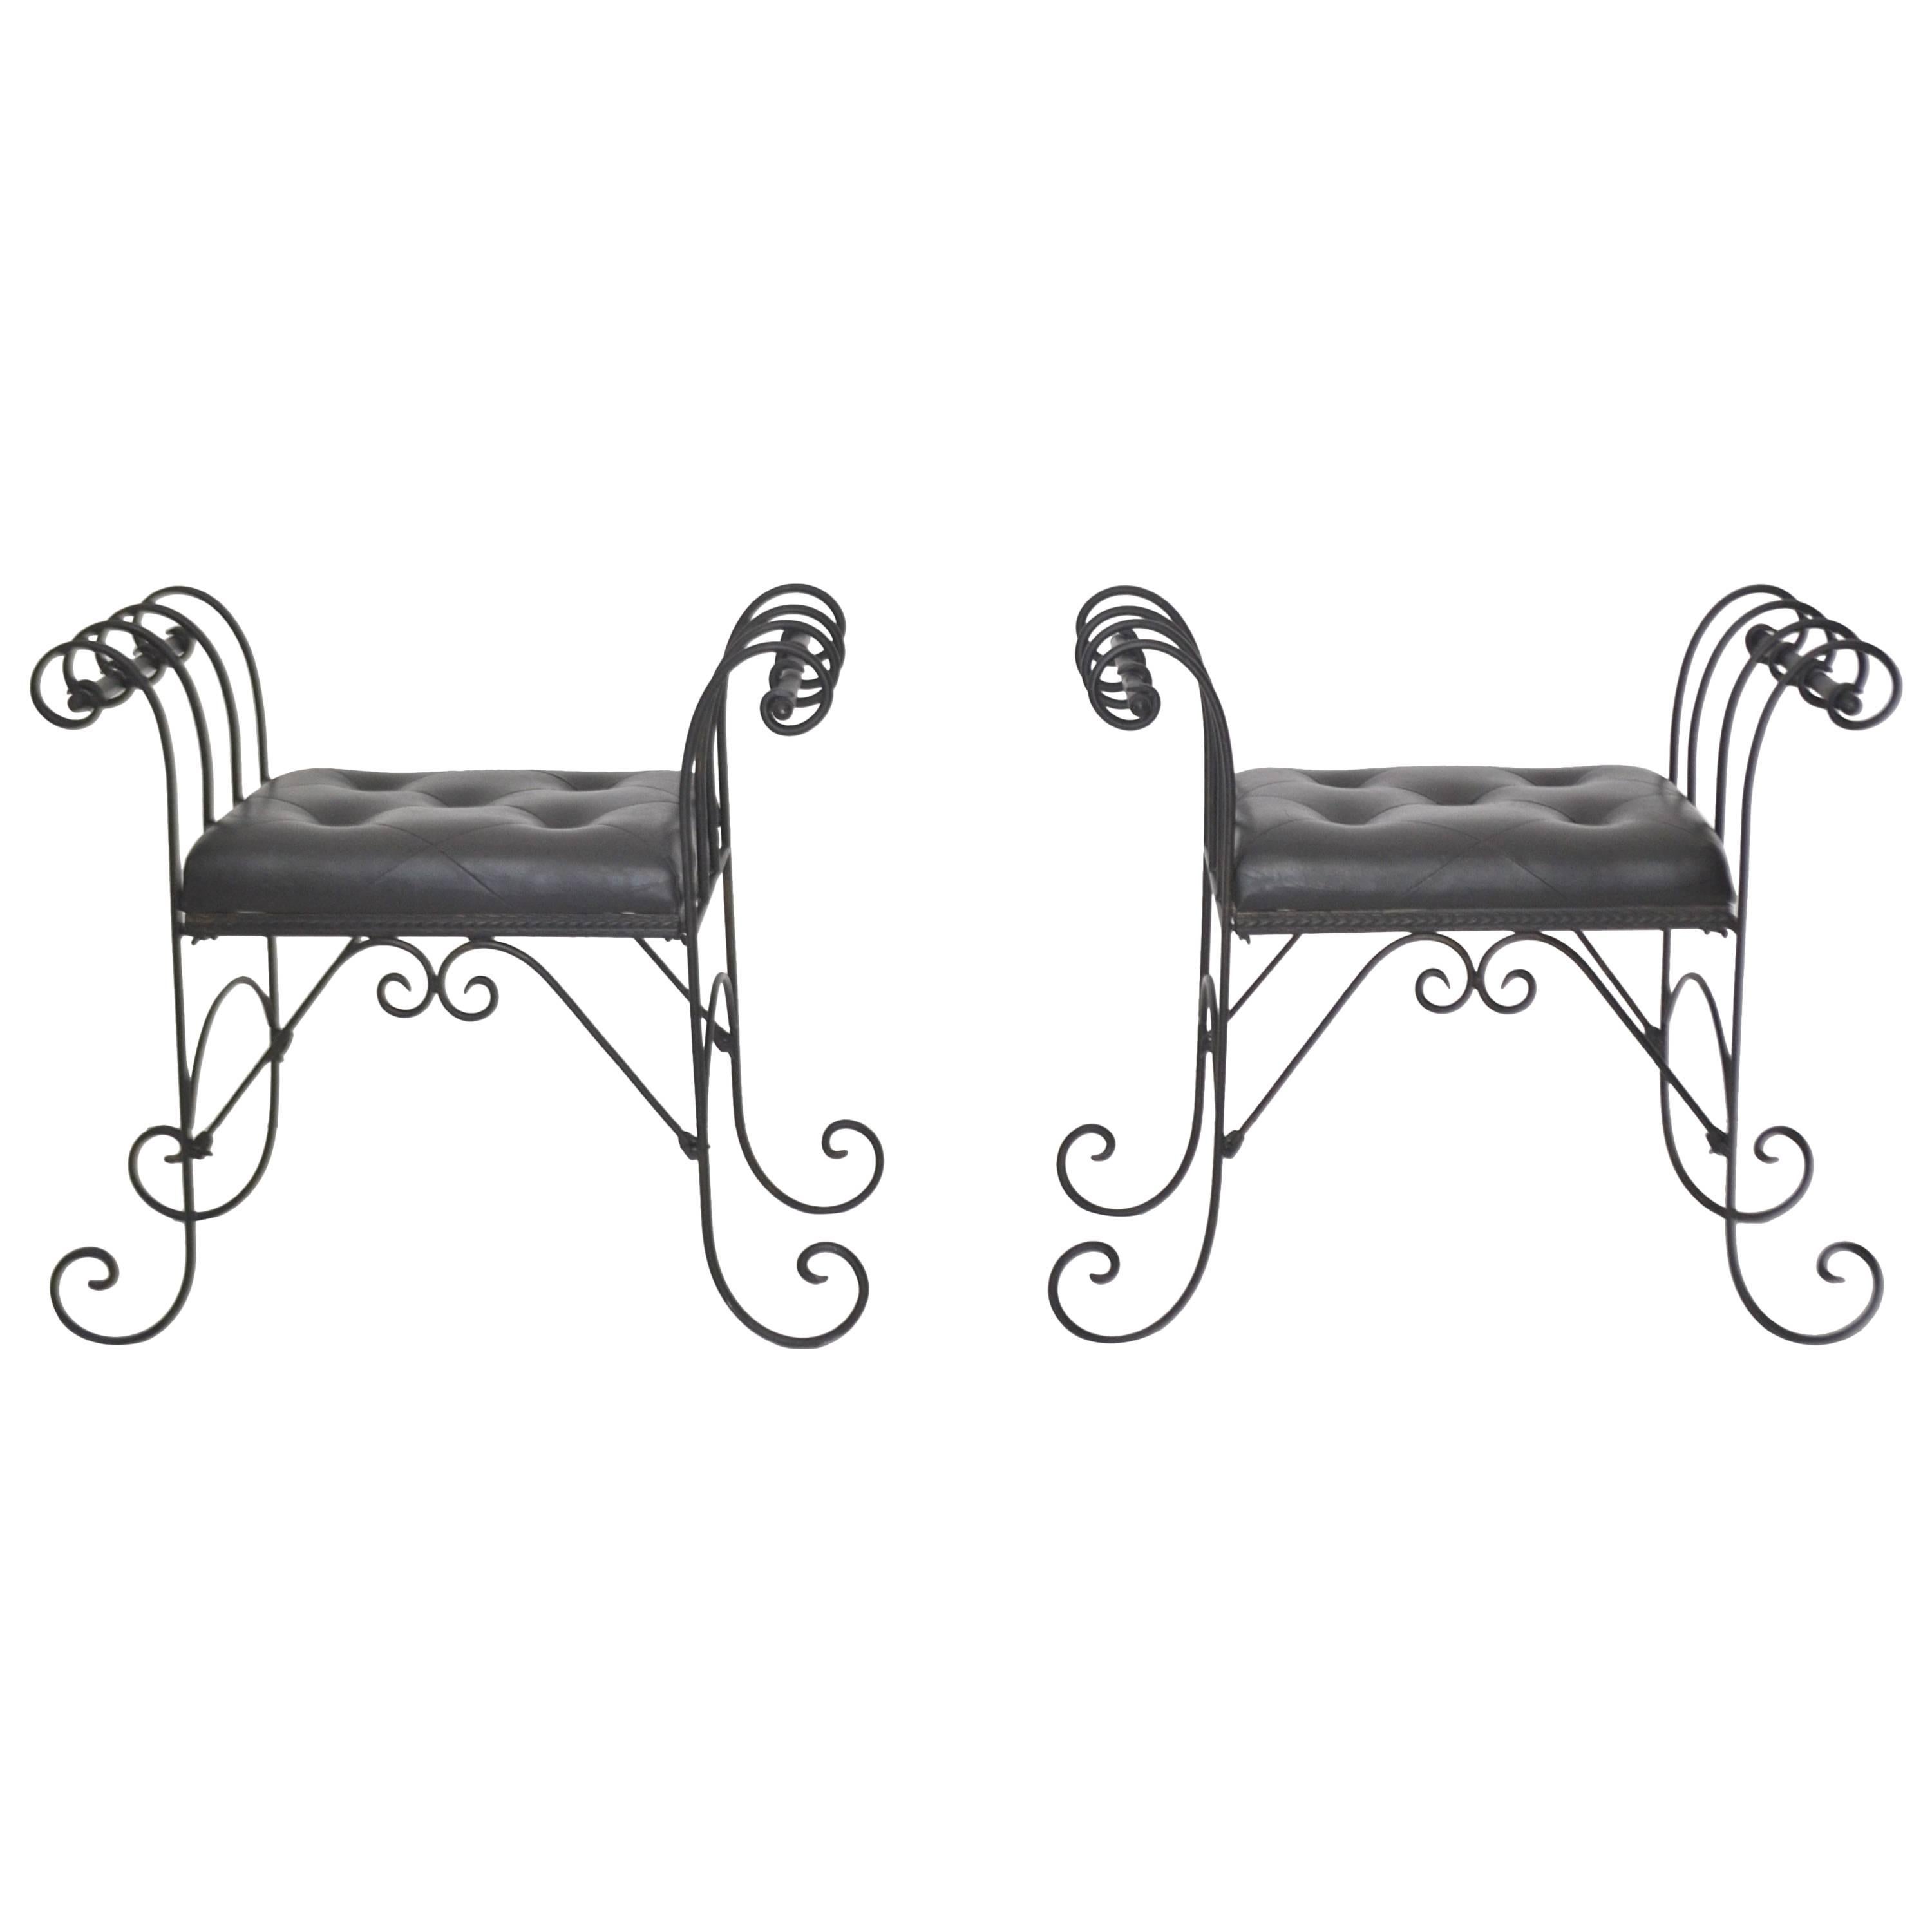 Pair of Midcentury Wrought Iron Tufted Leather Benches For Sale